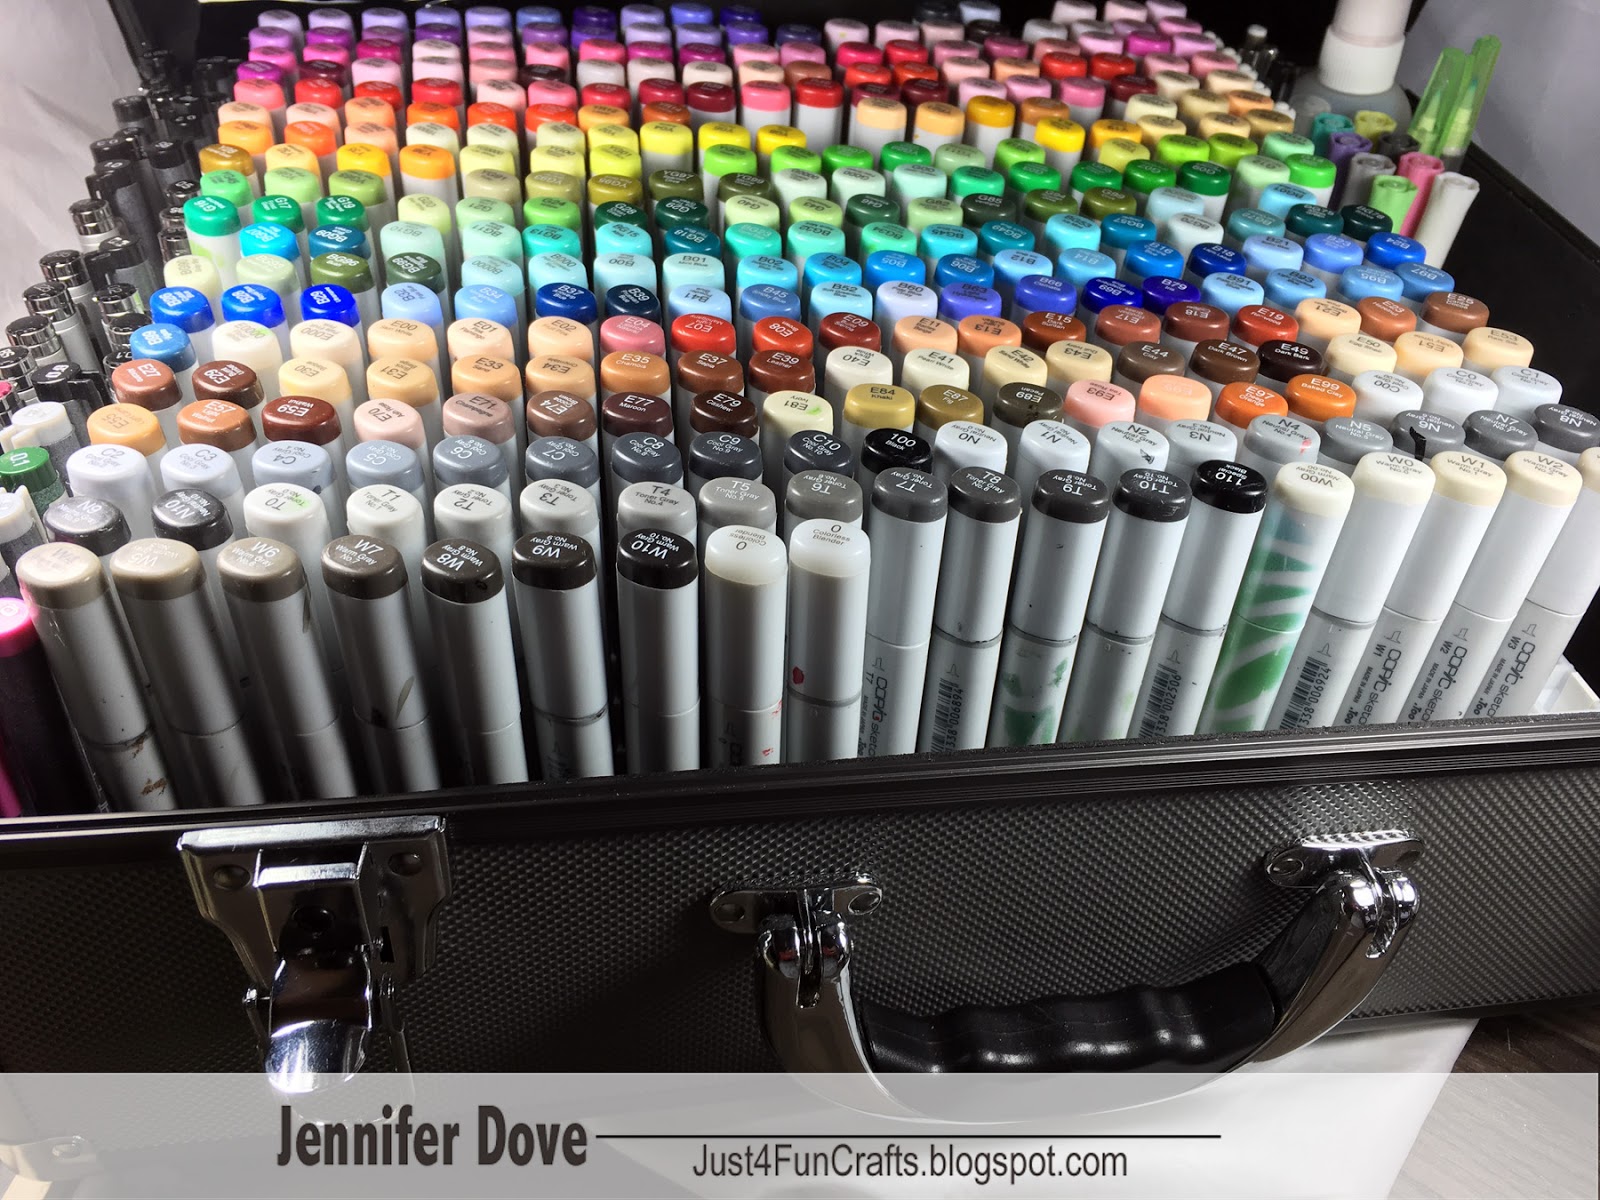 Copic Must Haves – Sketchbook – Just4FunCrafts